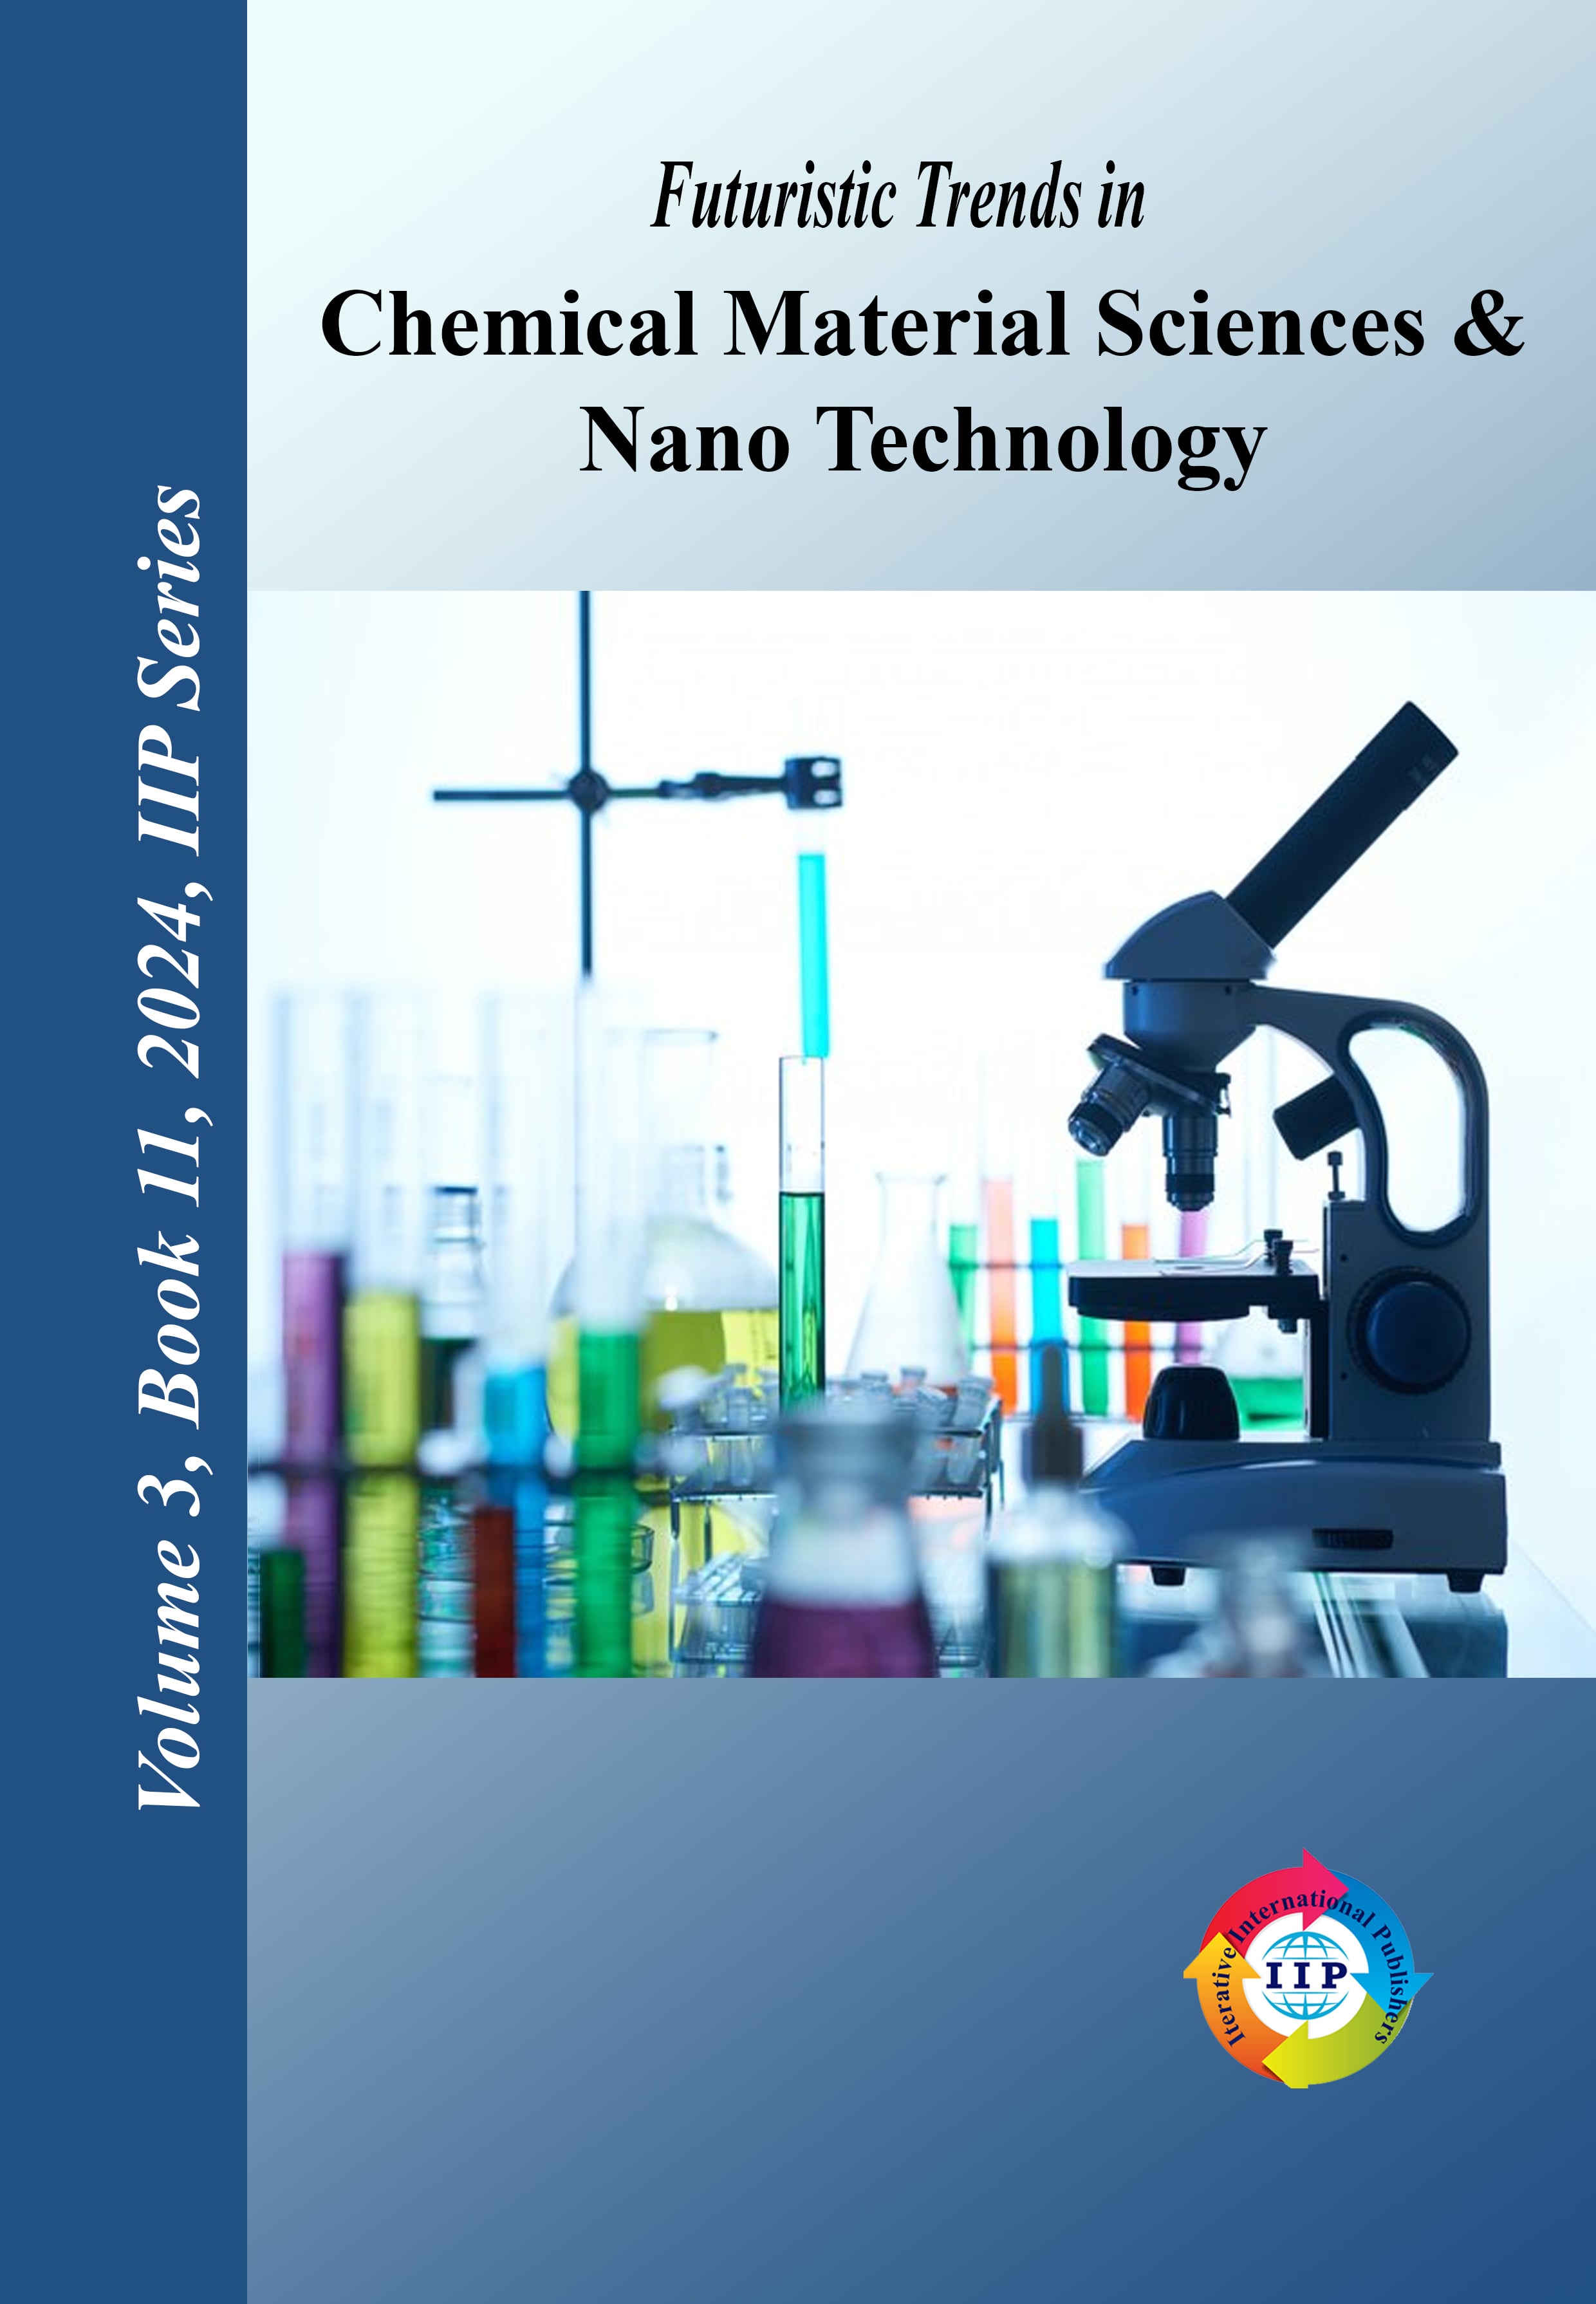 Futuristic Trends in Chemical Material Sciences & Nano Technology  Volume 3 Book 11